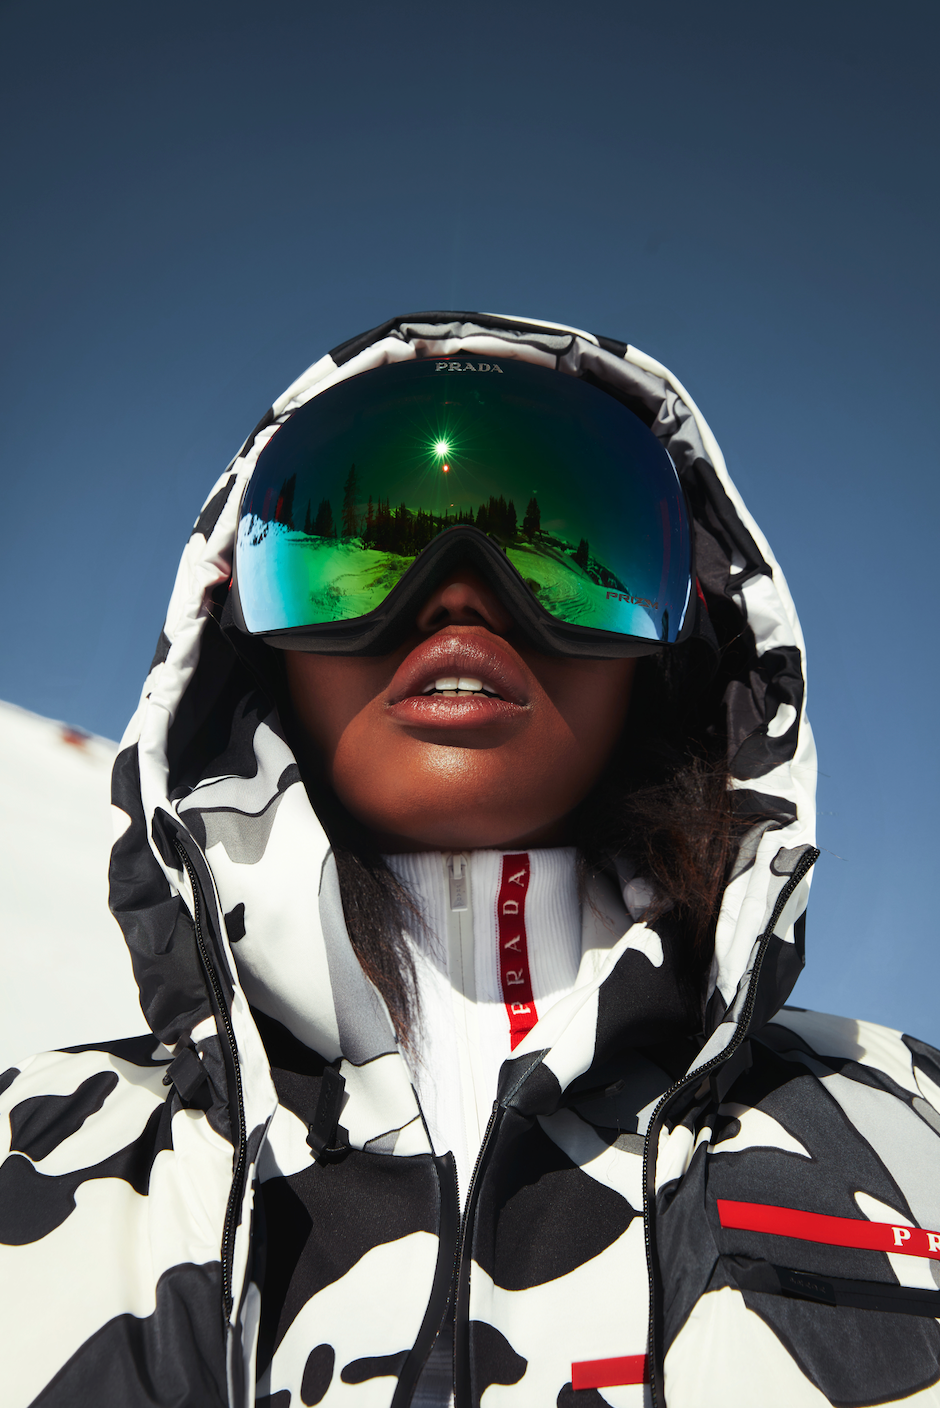 Prada Ski Collection: Apparel, Accessories and Exclusive Skis